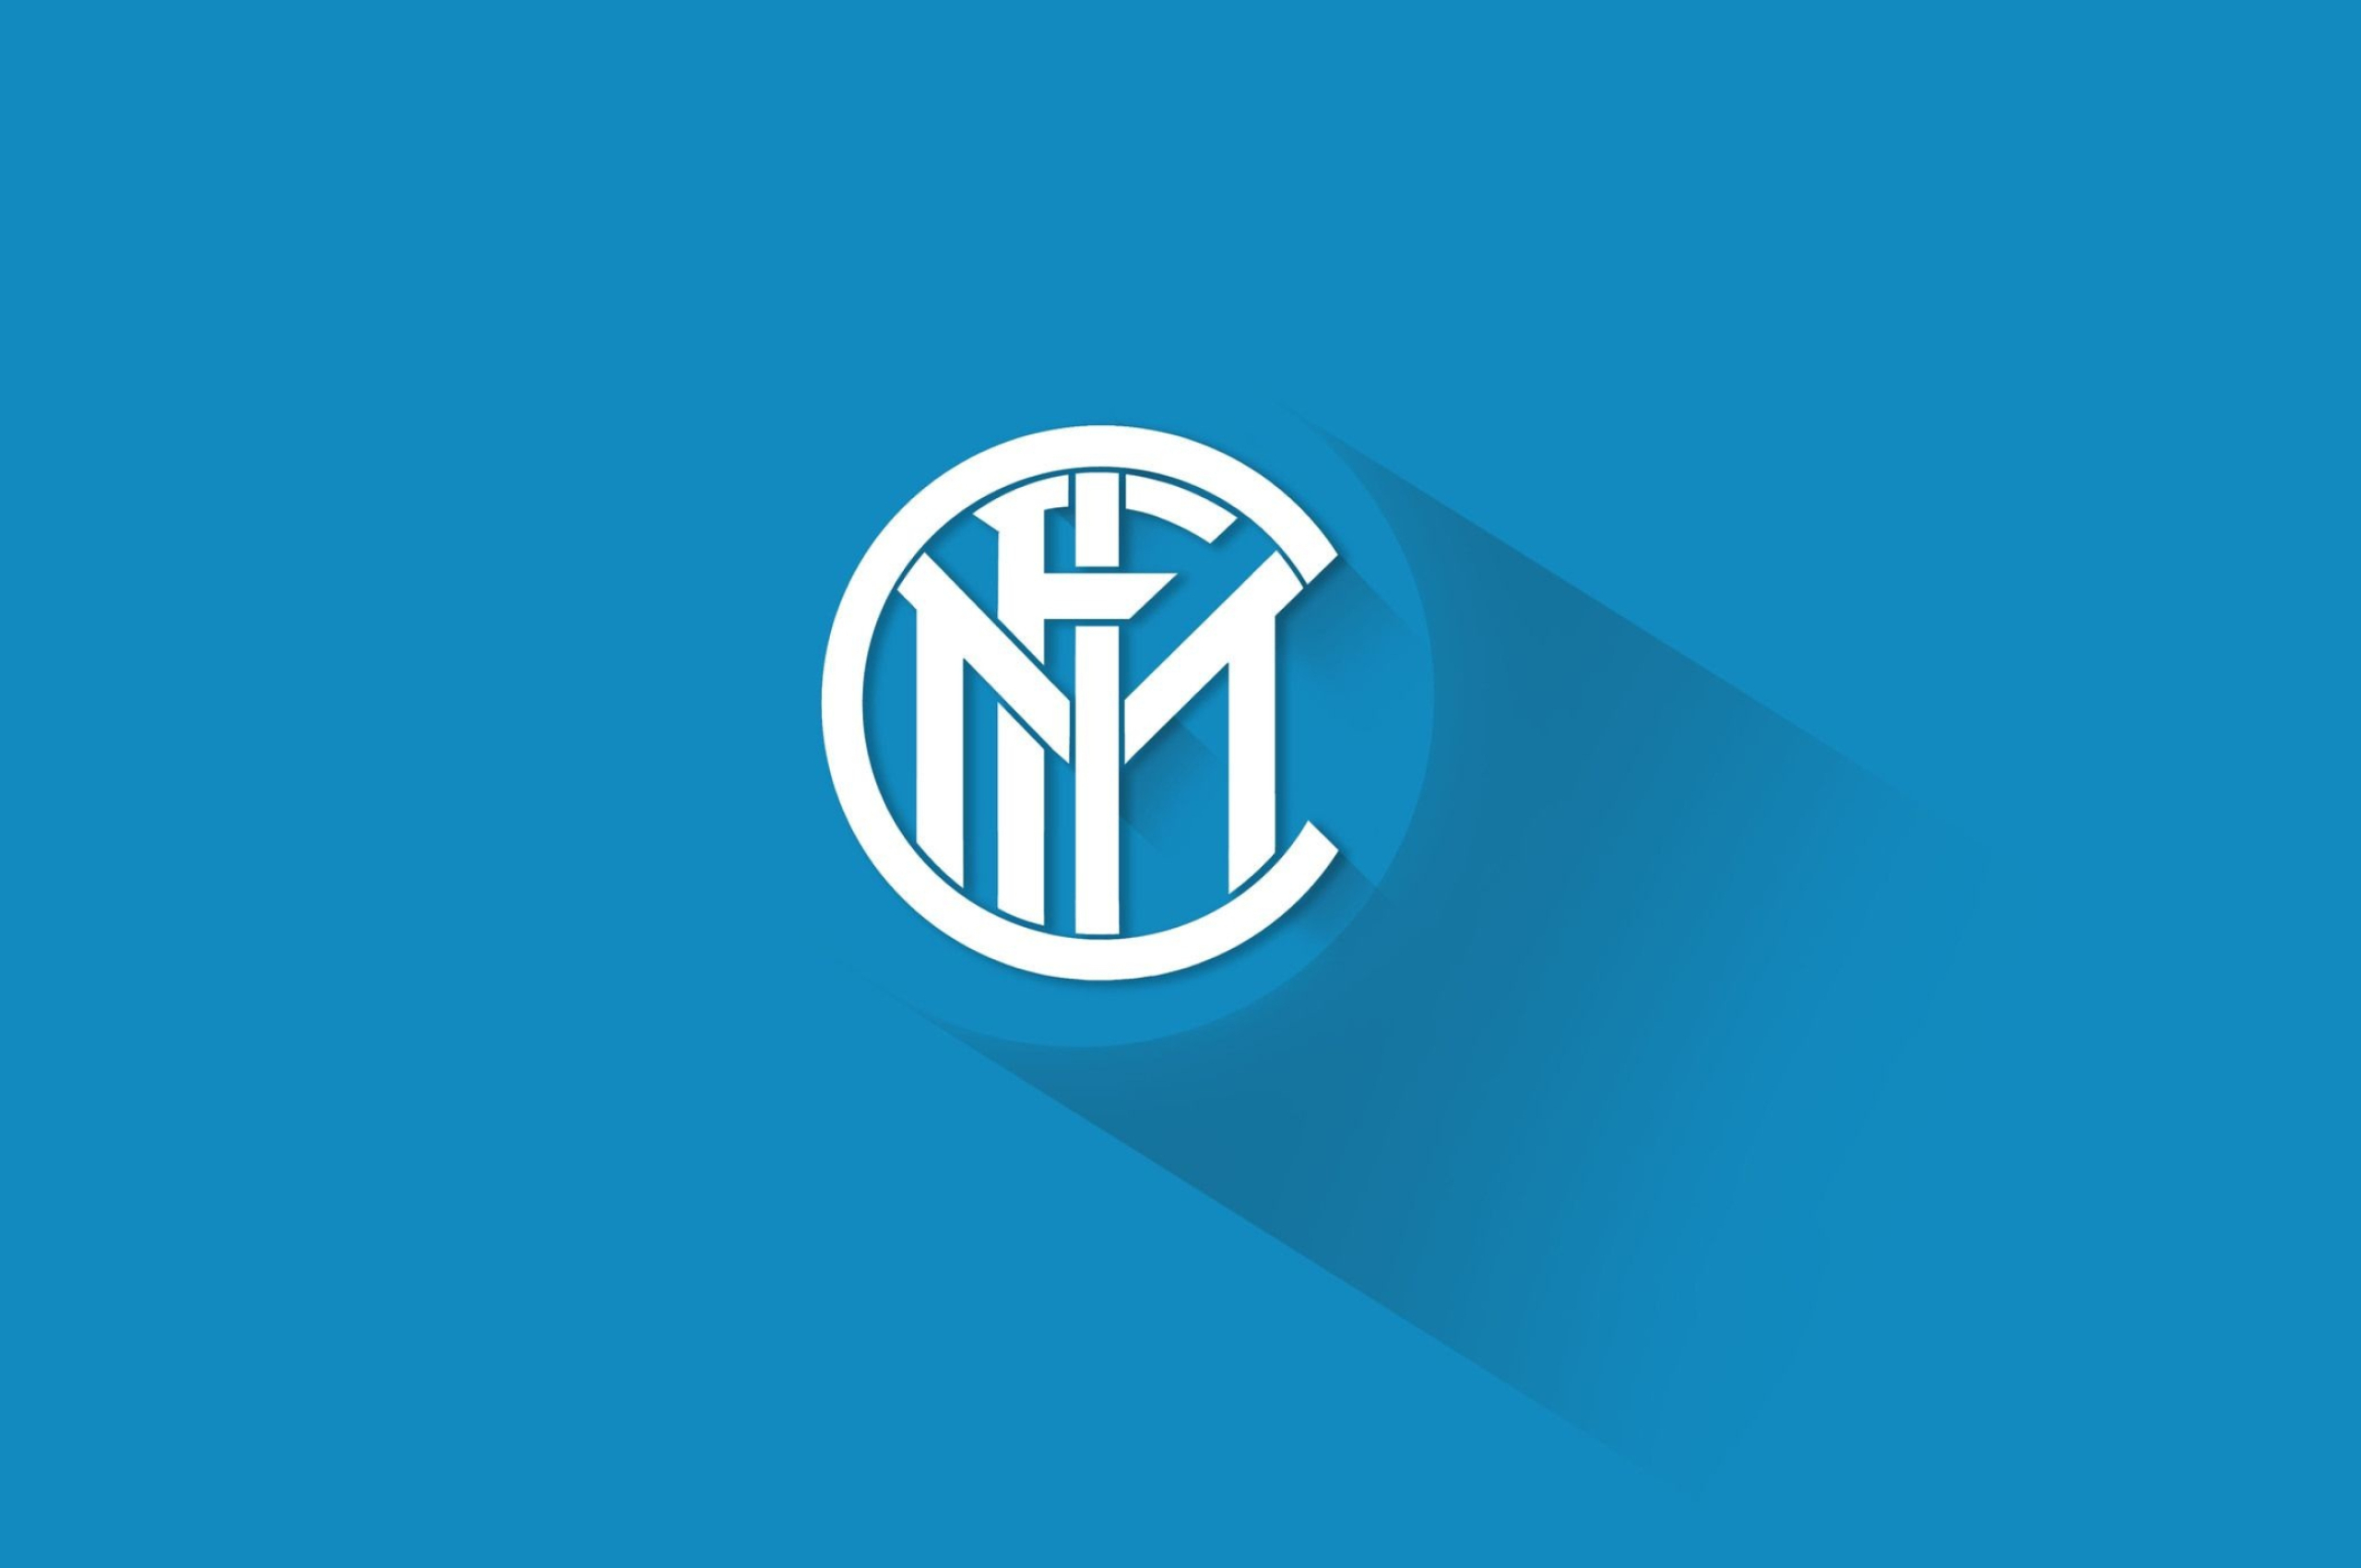 Inter: Since its formation, the club has won 34 domestic trophies, including 19 league titles, 8 Coppa Italia, and 7 Supercoppa Italiana. 2560x1700 HD Background.